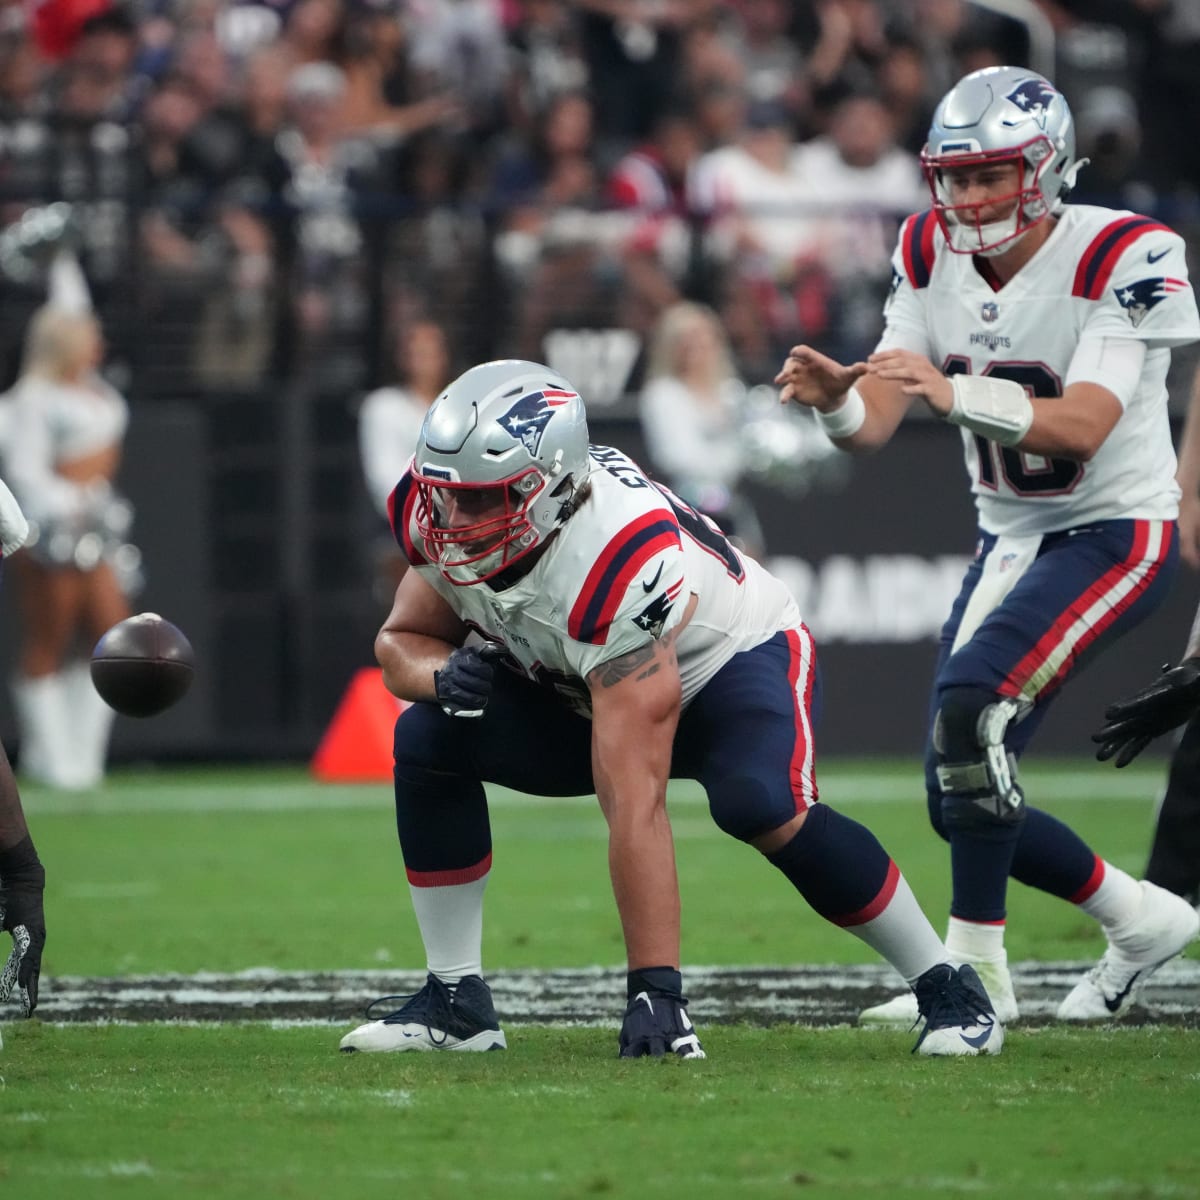 Raiders keep Brian Hoyer, submit 53-man roster to NFL, Raiders News